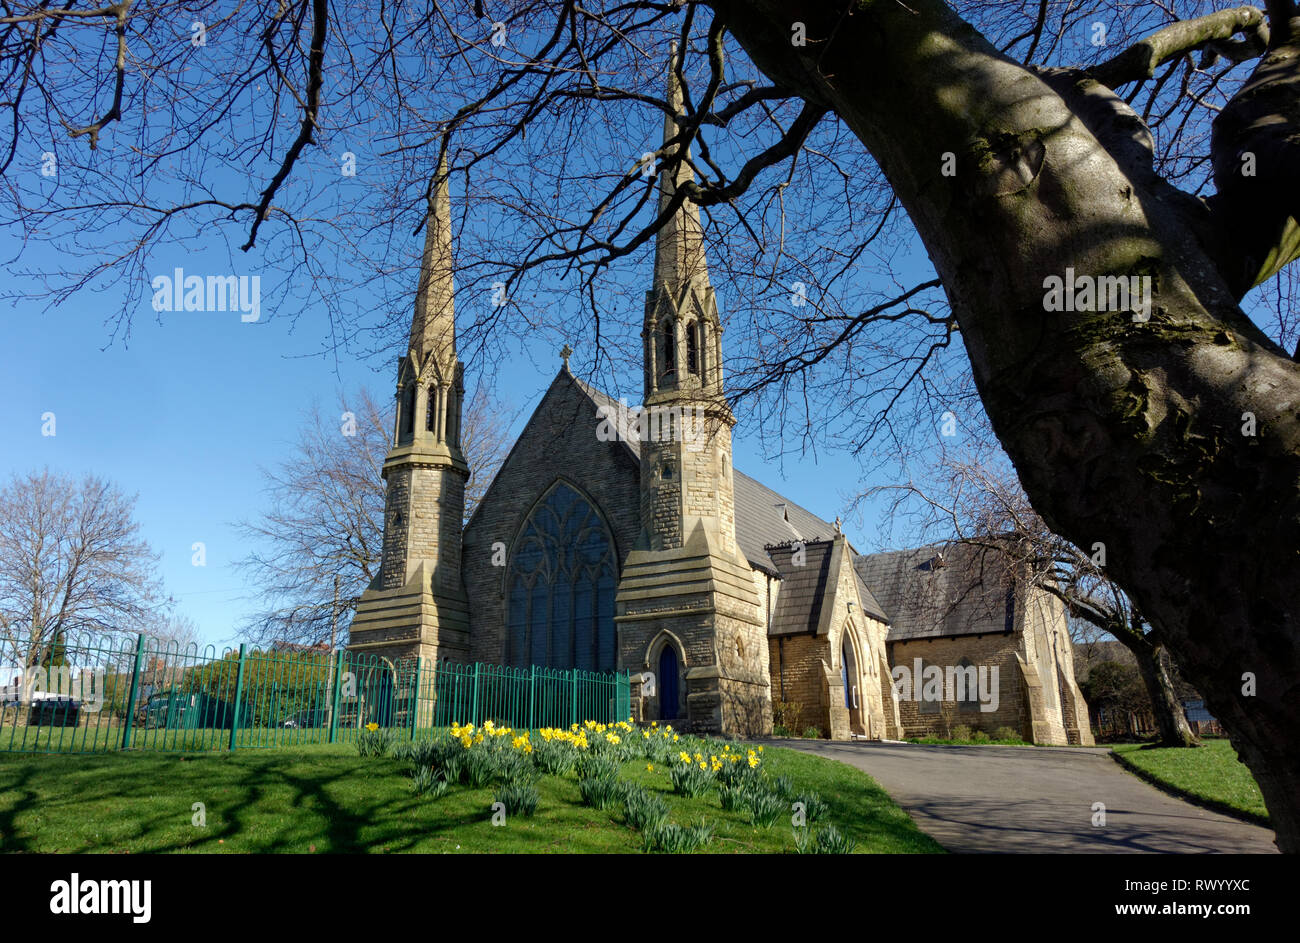 St Johns Church, Cowhill Road, Ashton under lyne, Greater Manchester. Stock Photo